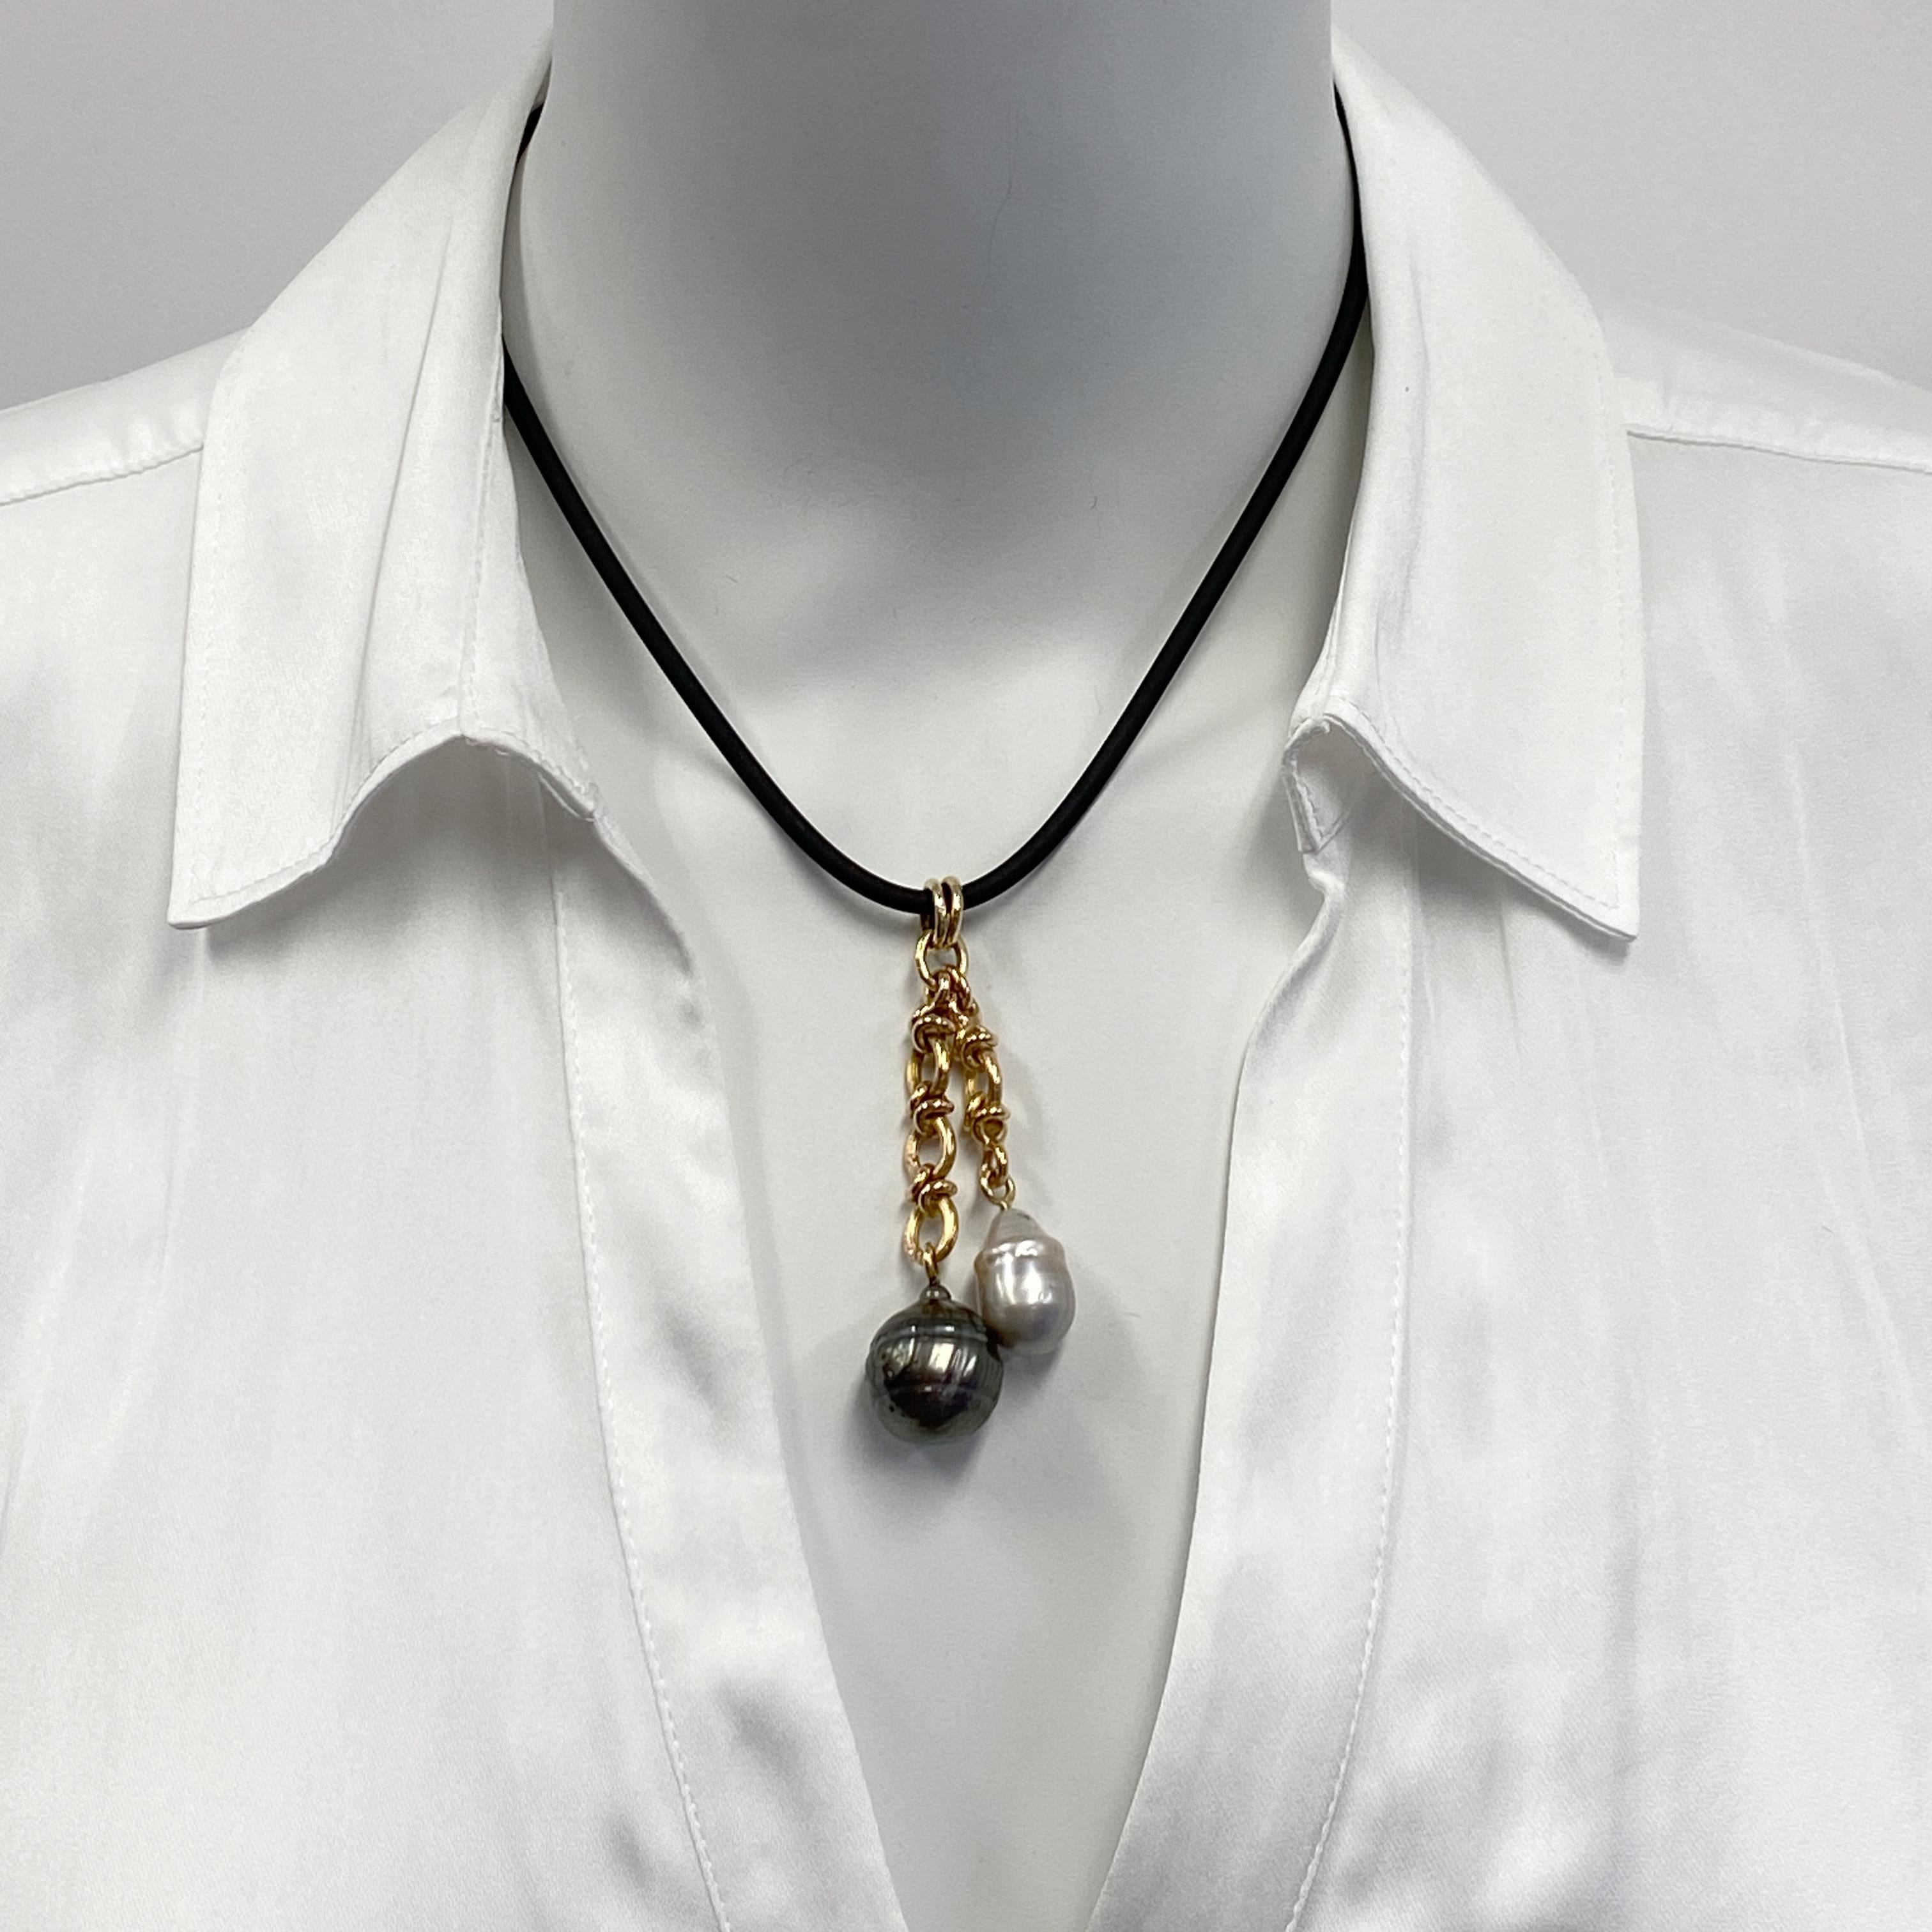 Two luscious and idiosyncratic baroque pearls hang from gorgeous links of 18 karat chain to make this one-of-a-kind pendant by Eytan Brandes.

Both of the pearls are unusual and both are from our pearl dealer, George Hajjar of Seven Seas Pearls. 